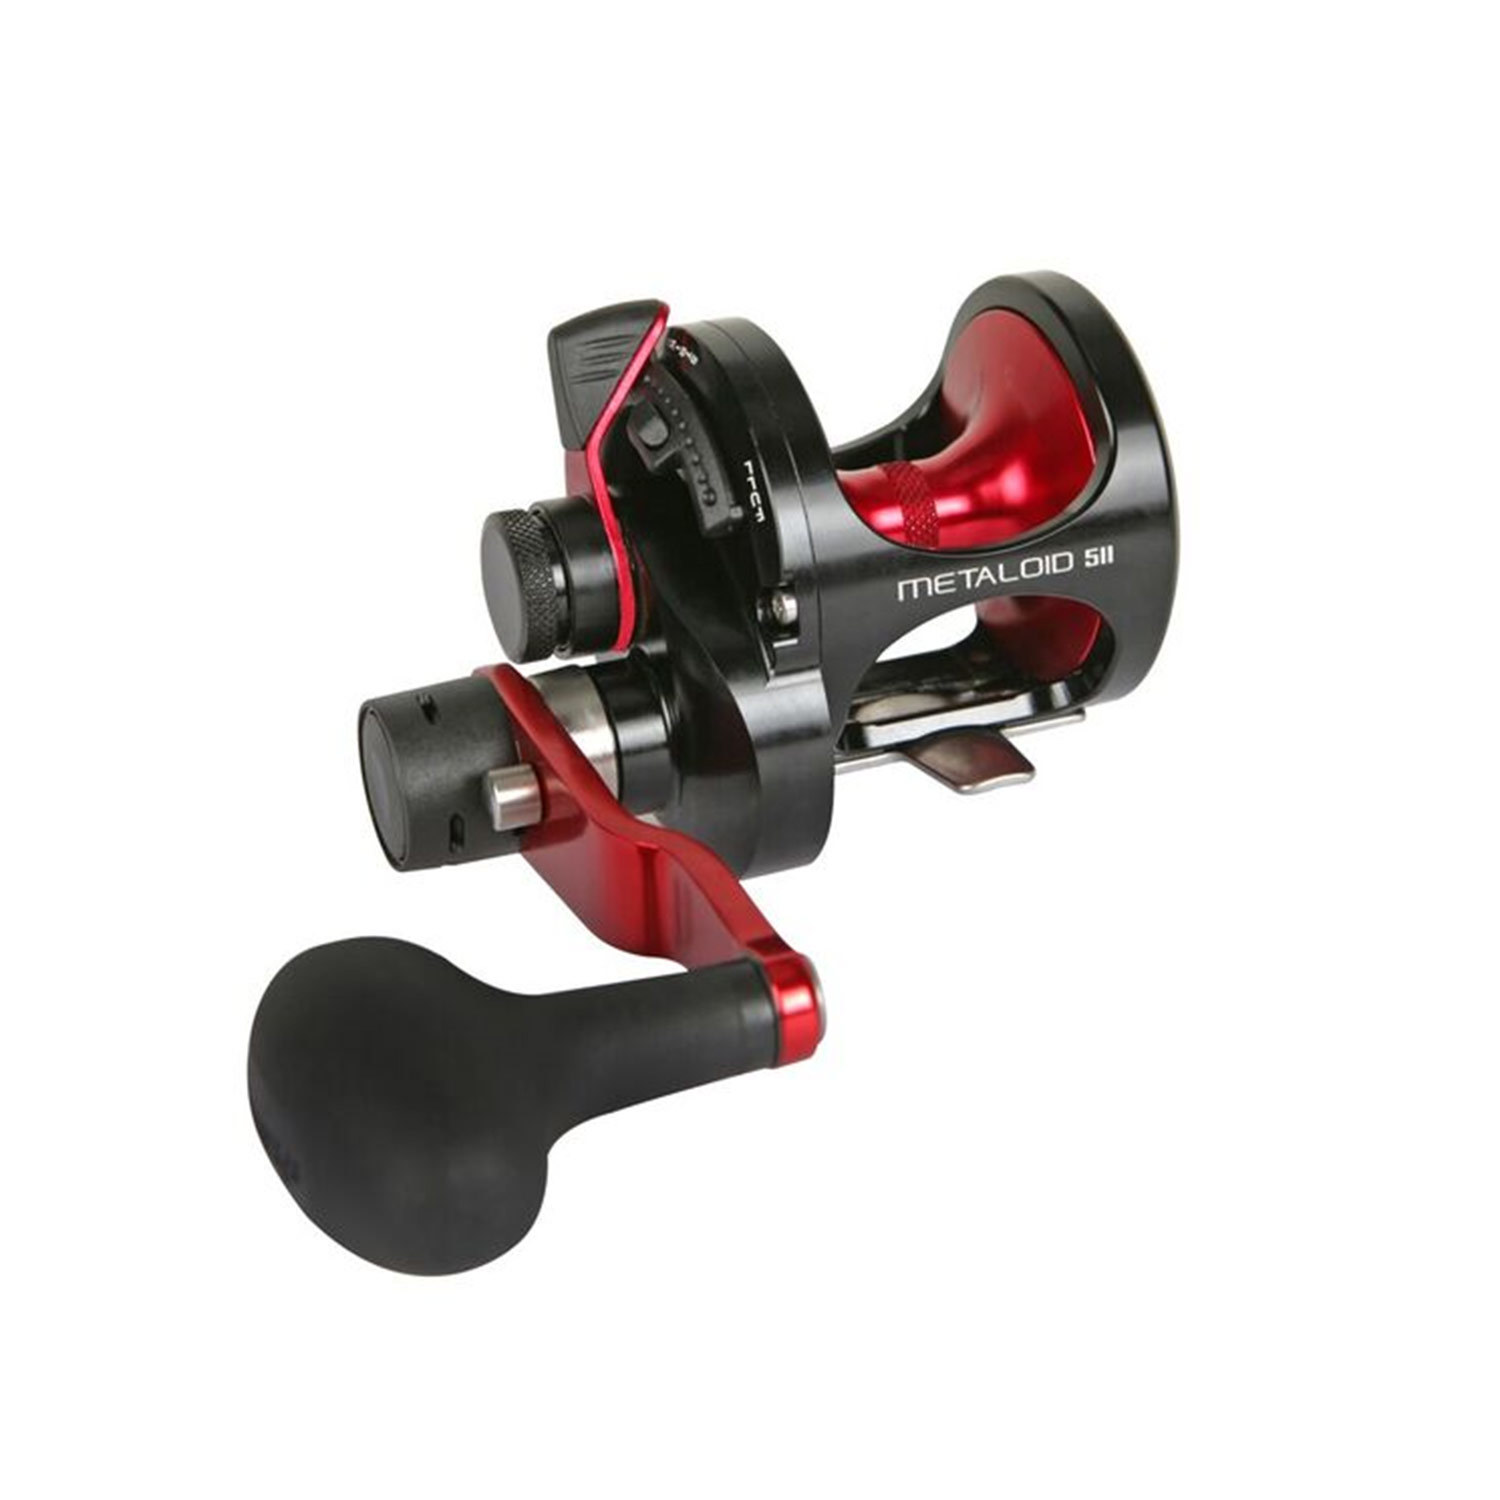 Metaloid M-5IIR Two-Speed Lever Drag Conventional Reel